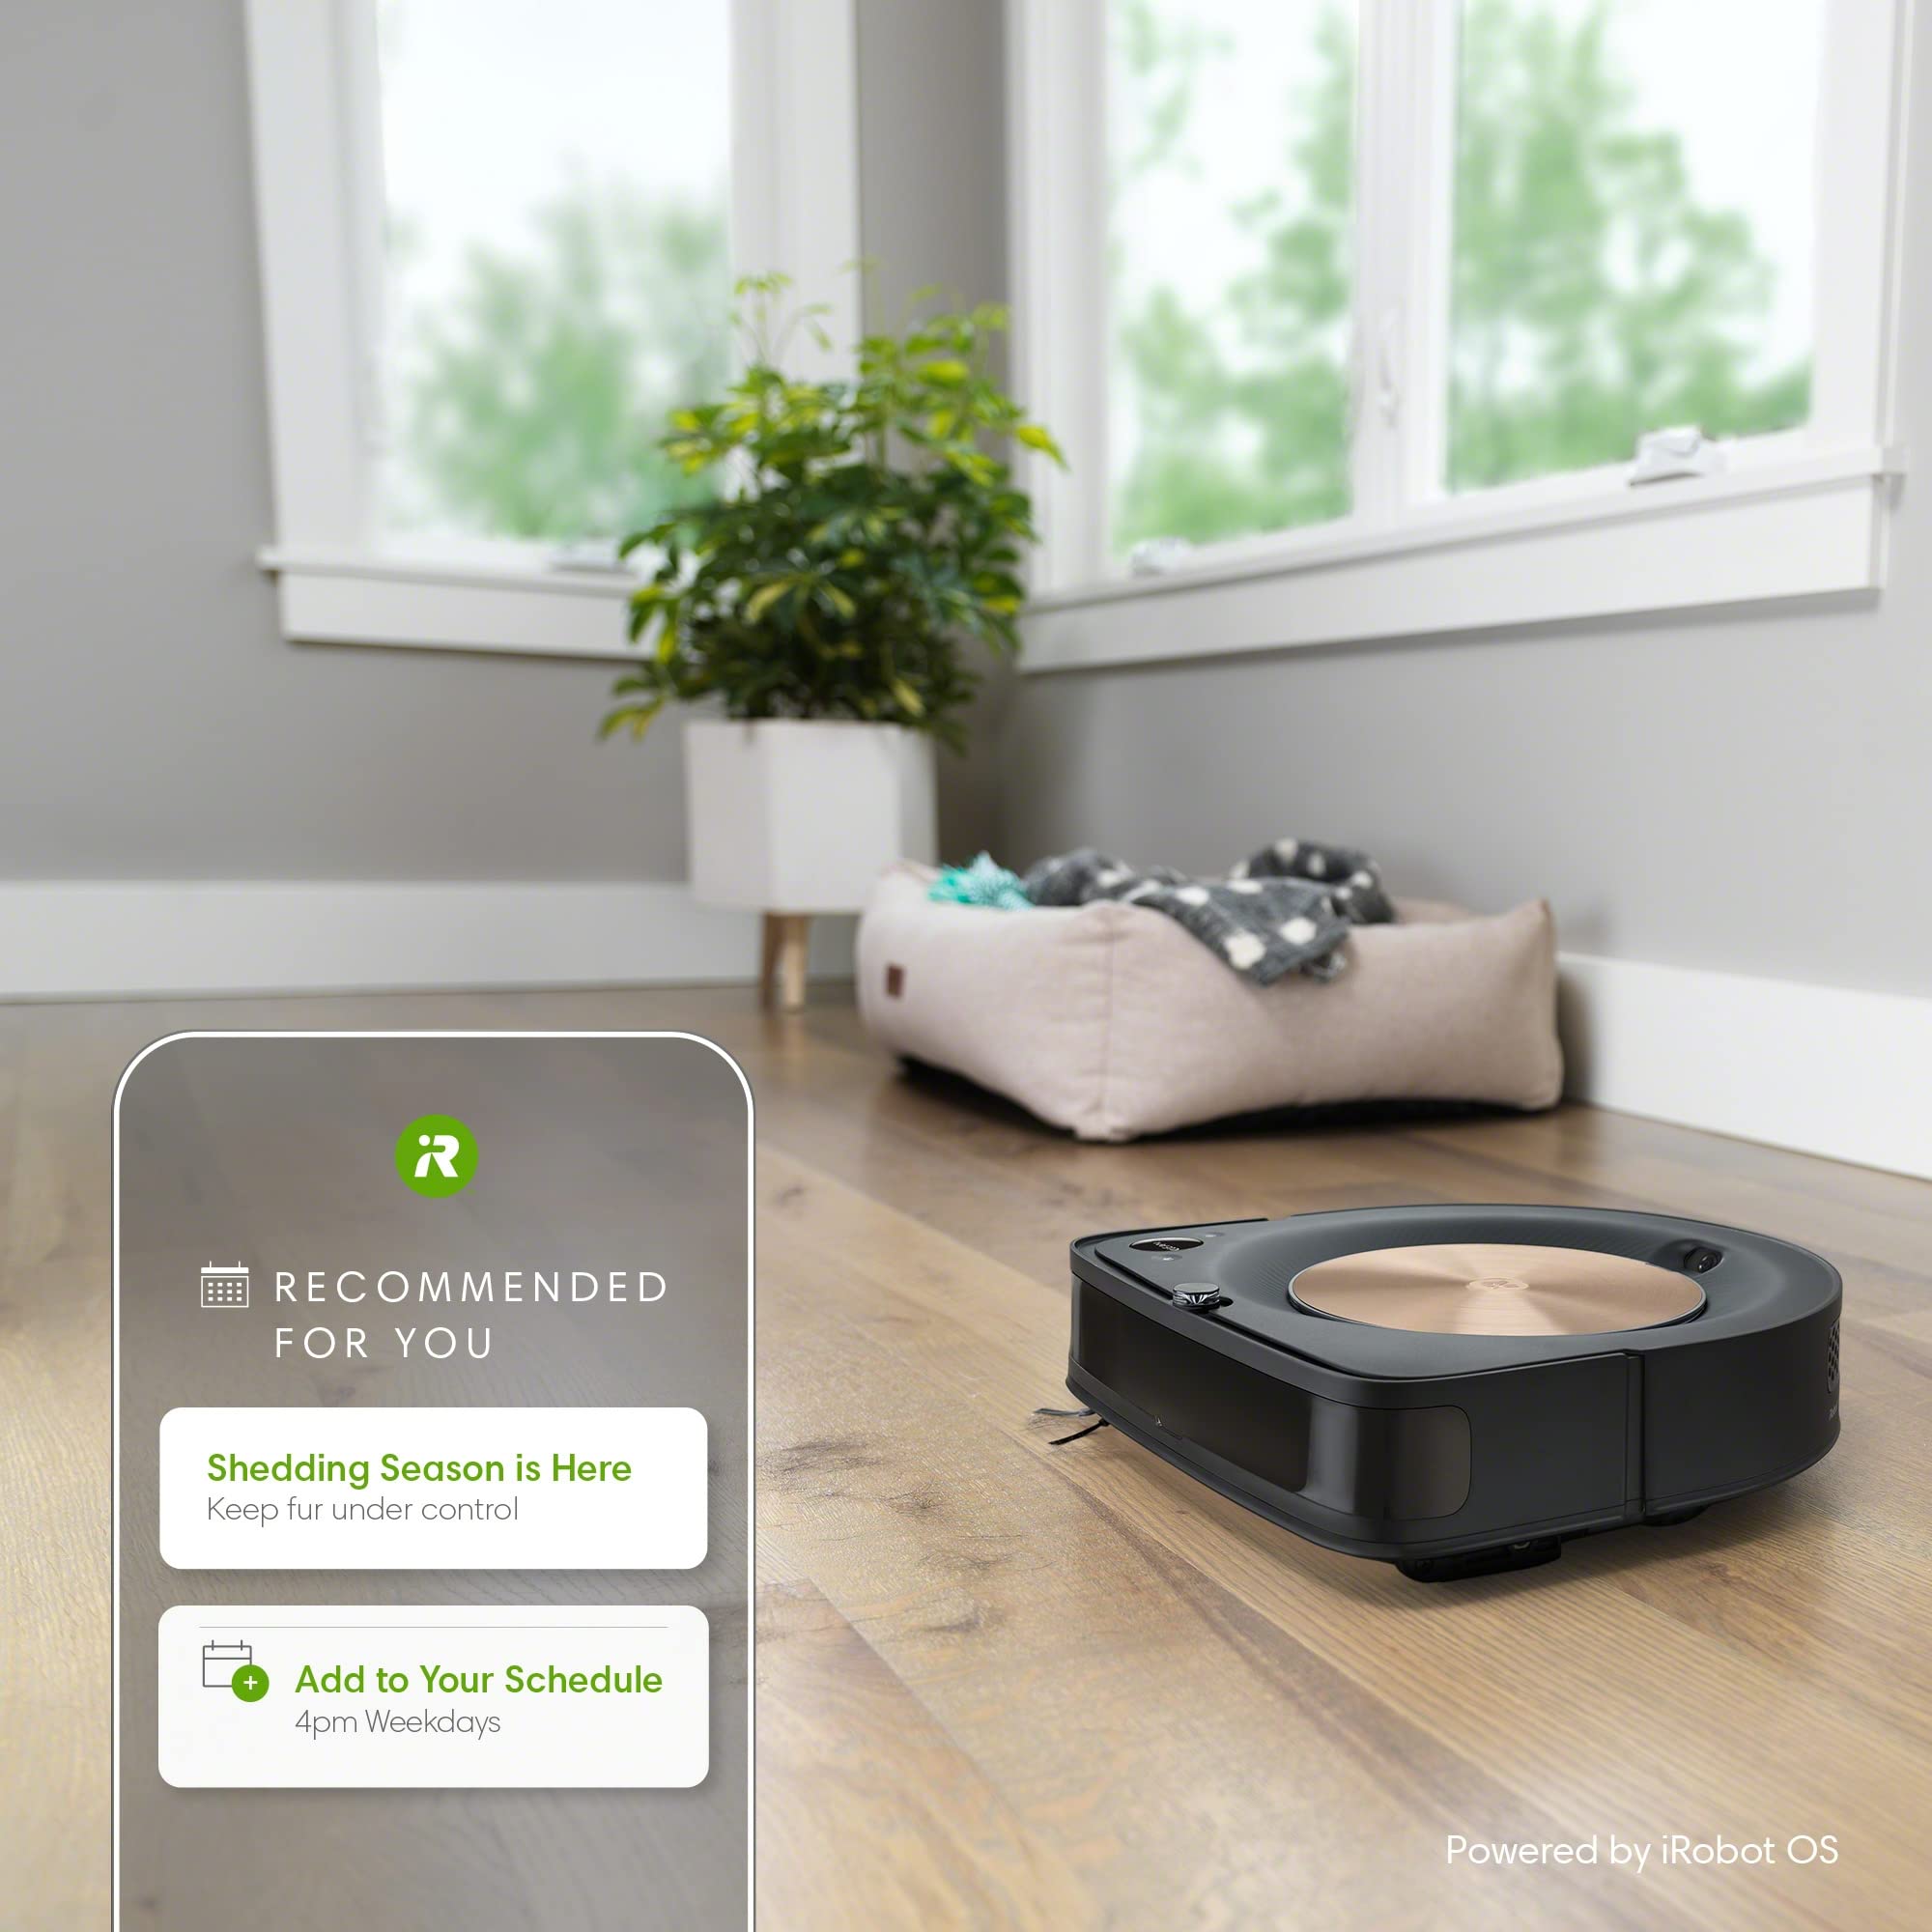 iRobot Roomba s9+ (9550) Self Emptying Robot Vacuum - Empties Itself for up to 60 Days, Detects & Cleans Around Objects in Your Home, Smart Mapping, Powerful Suction, Corner & Edge Cleaning